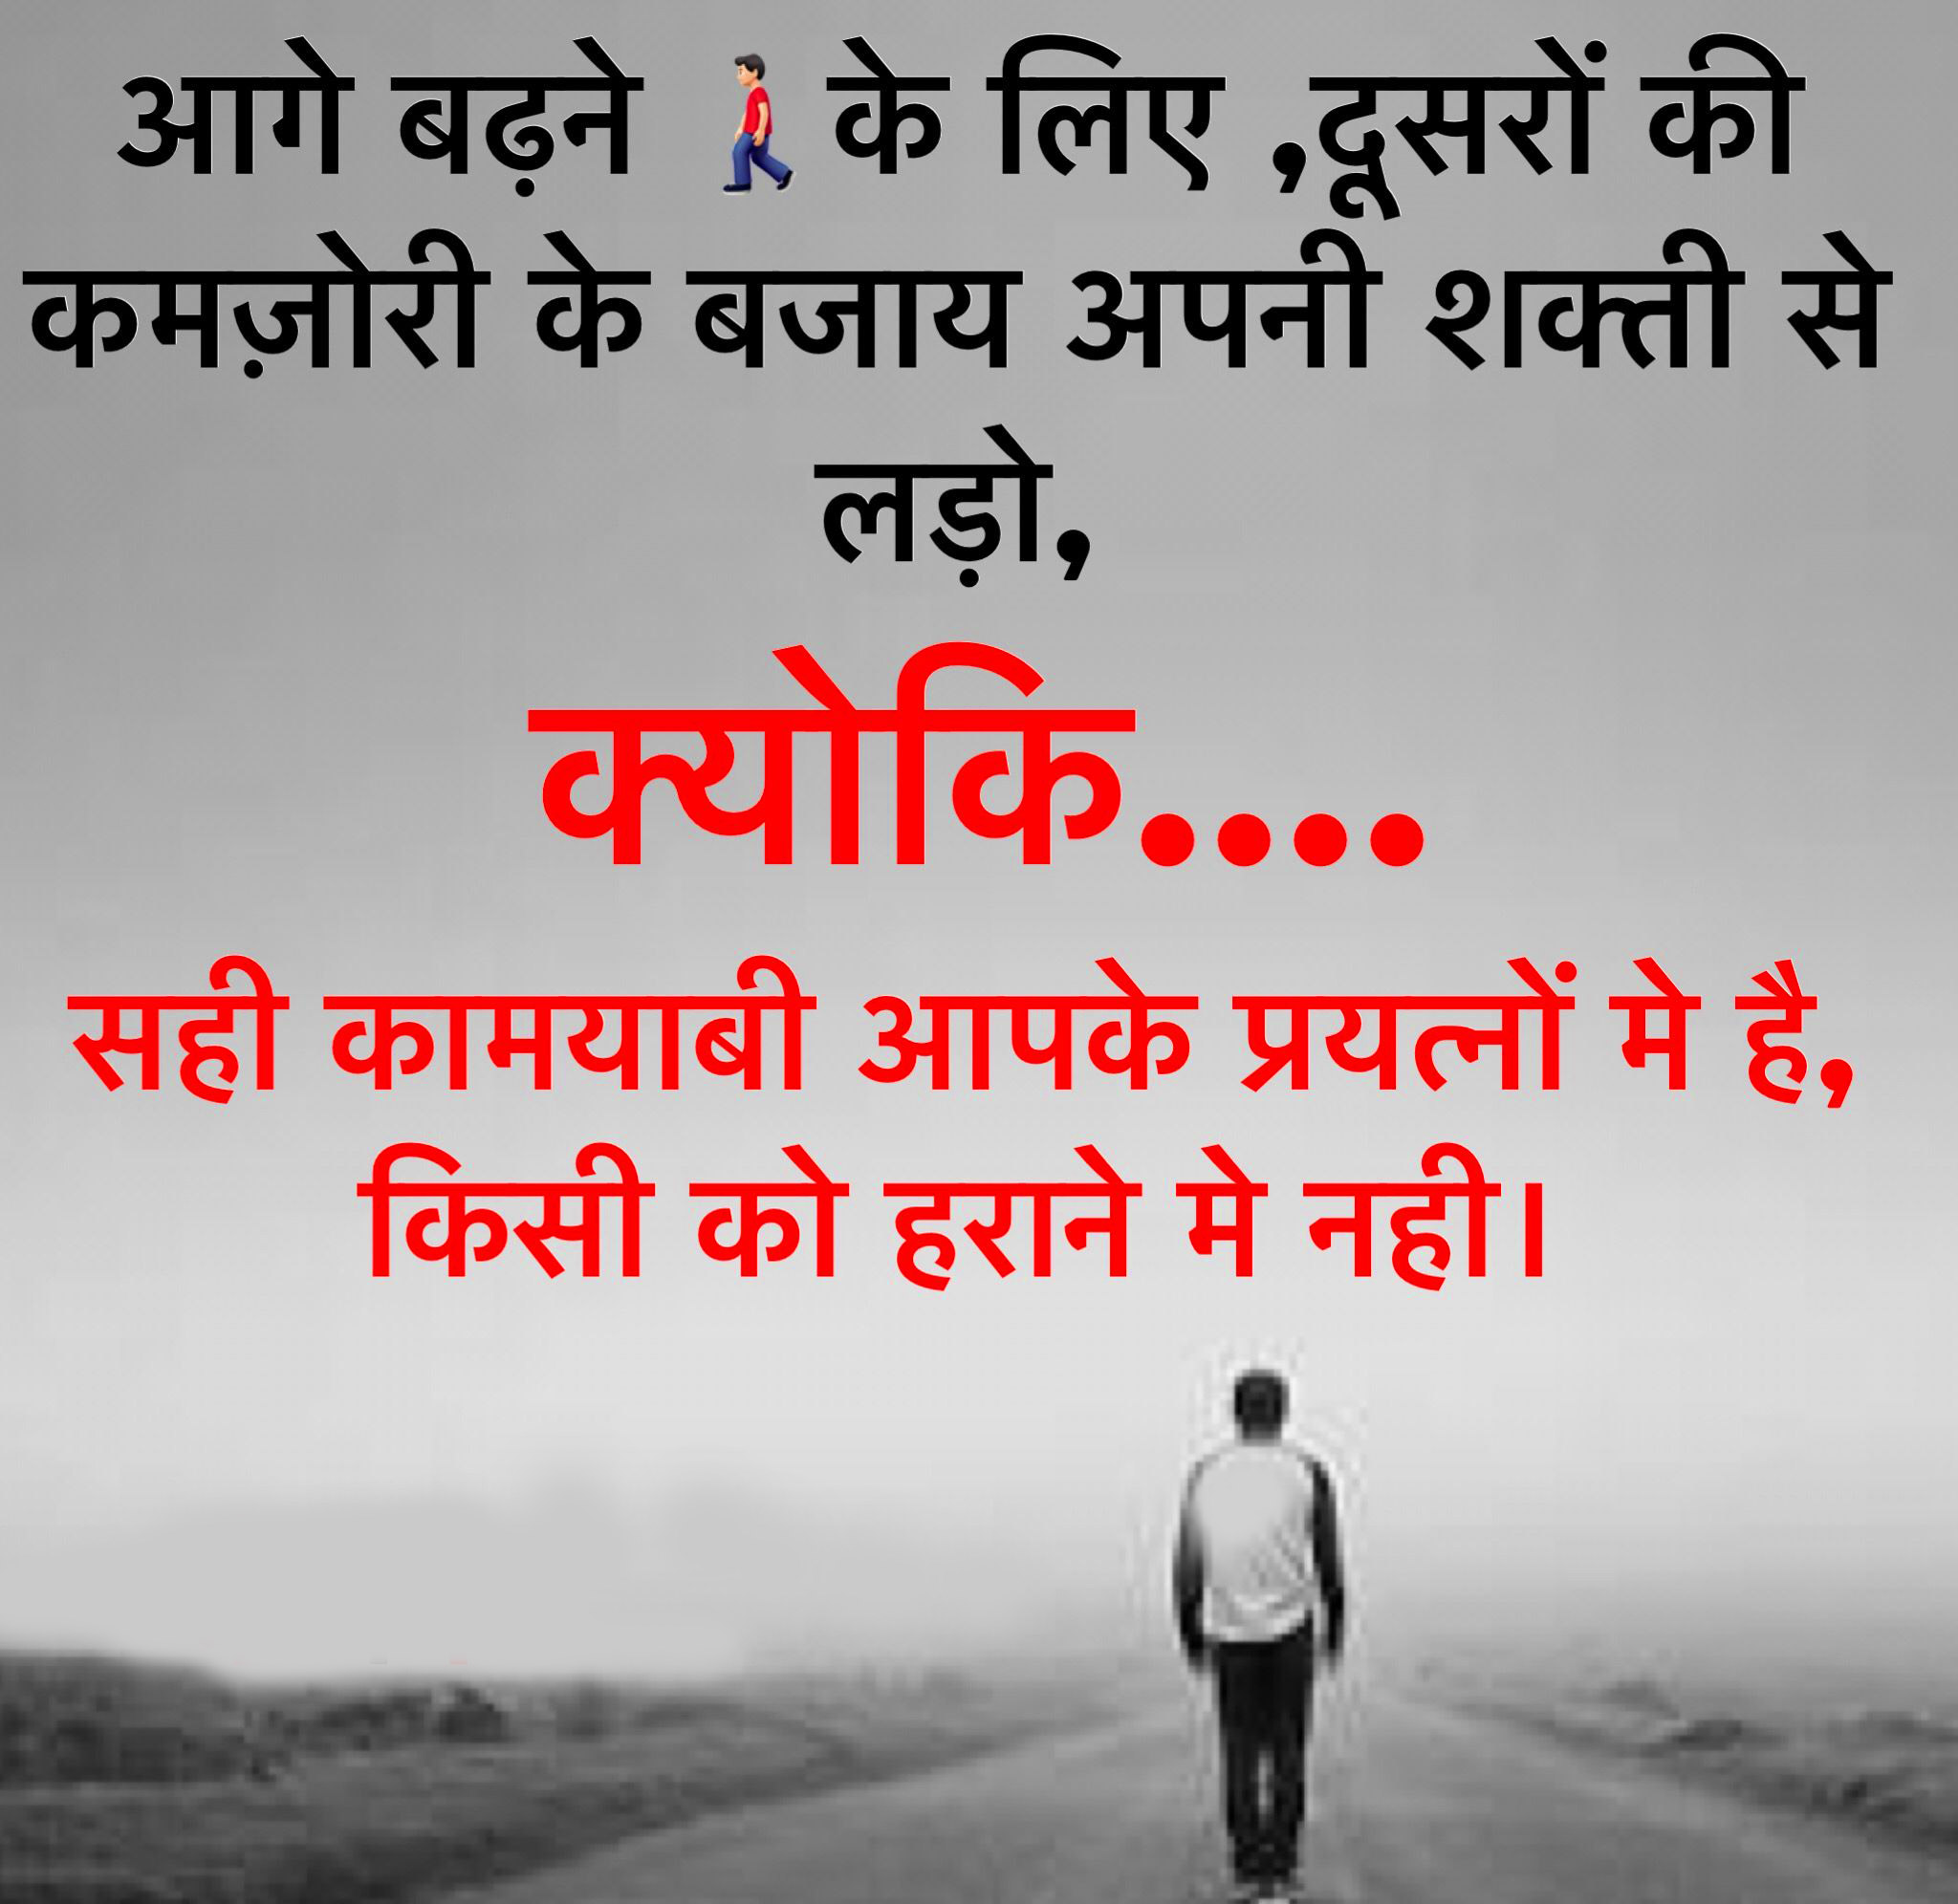 Top 27+ Motivational Quotes in Hindi with Images - Good Morning Images HD